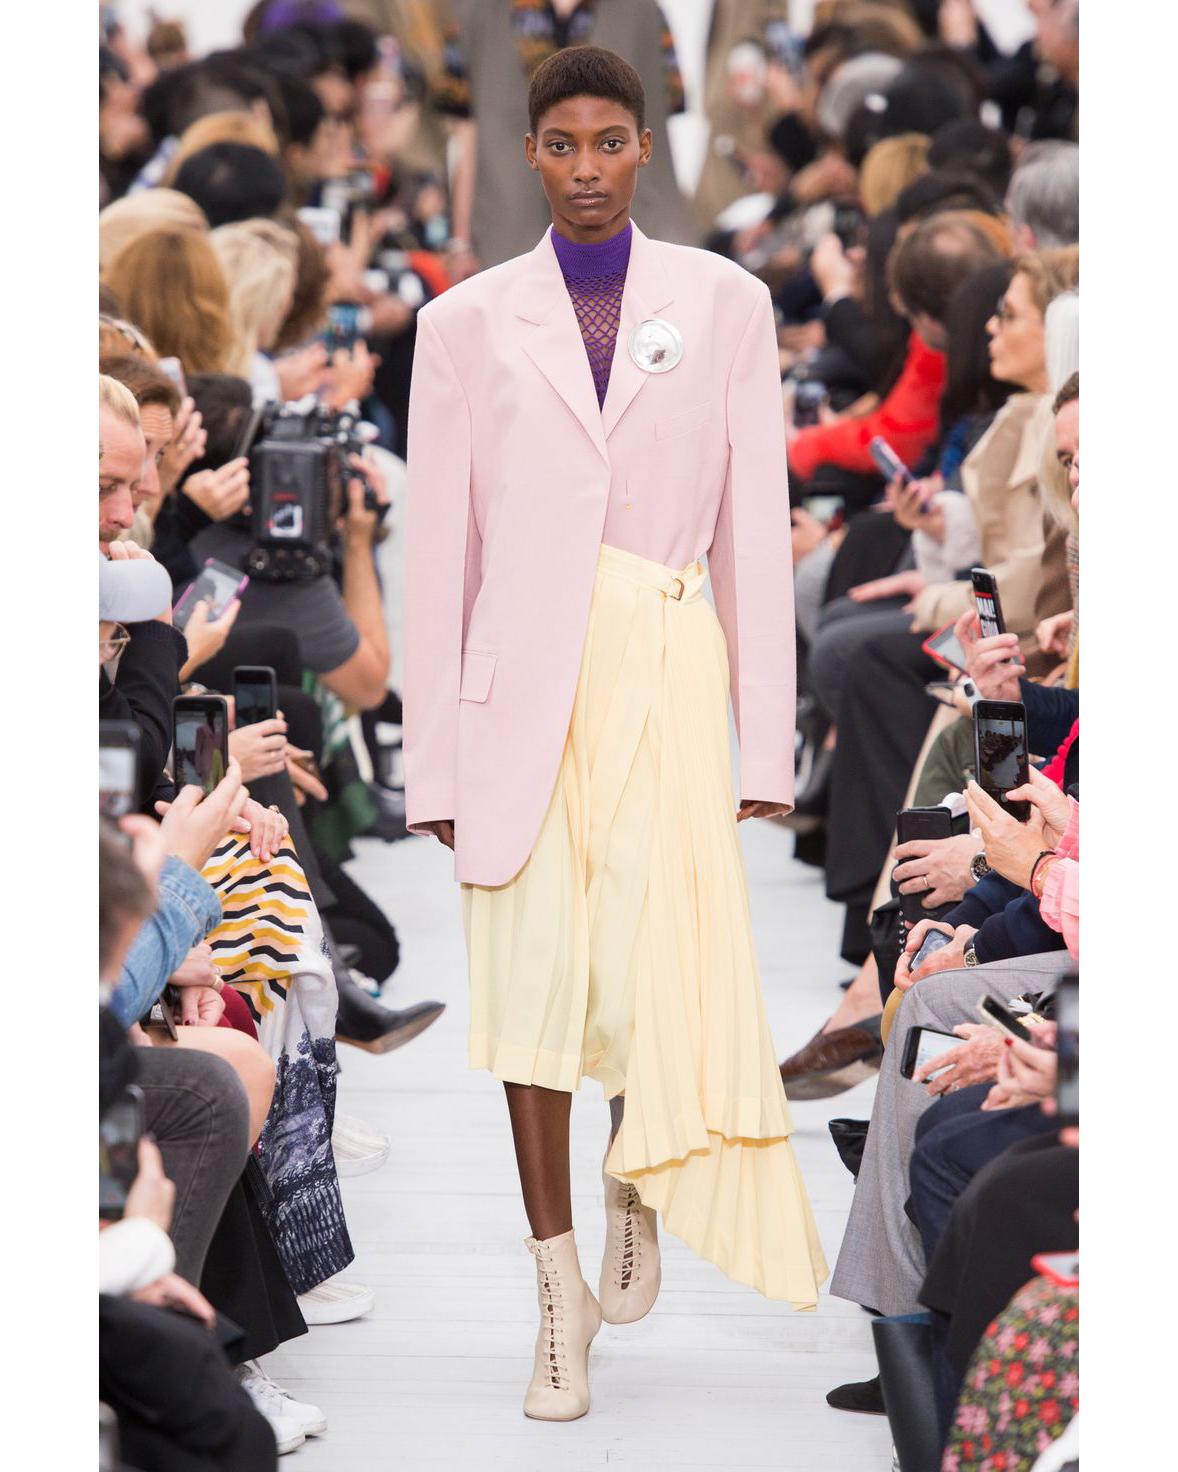 S/S 2018 Old Céline by Phoebe Philo blush pink wool suit set. Oversized menswear-inspired open tailored blazer jacket with padded shoulders and martingale belt, with slit in left side for optimal draping when worn belted. Belt is adjustable, with